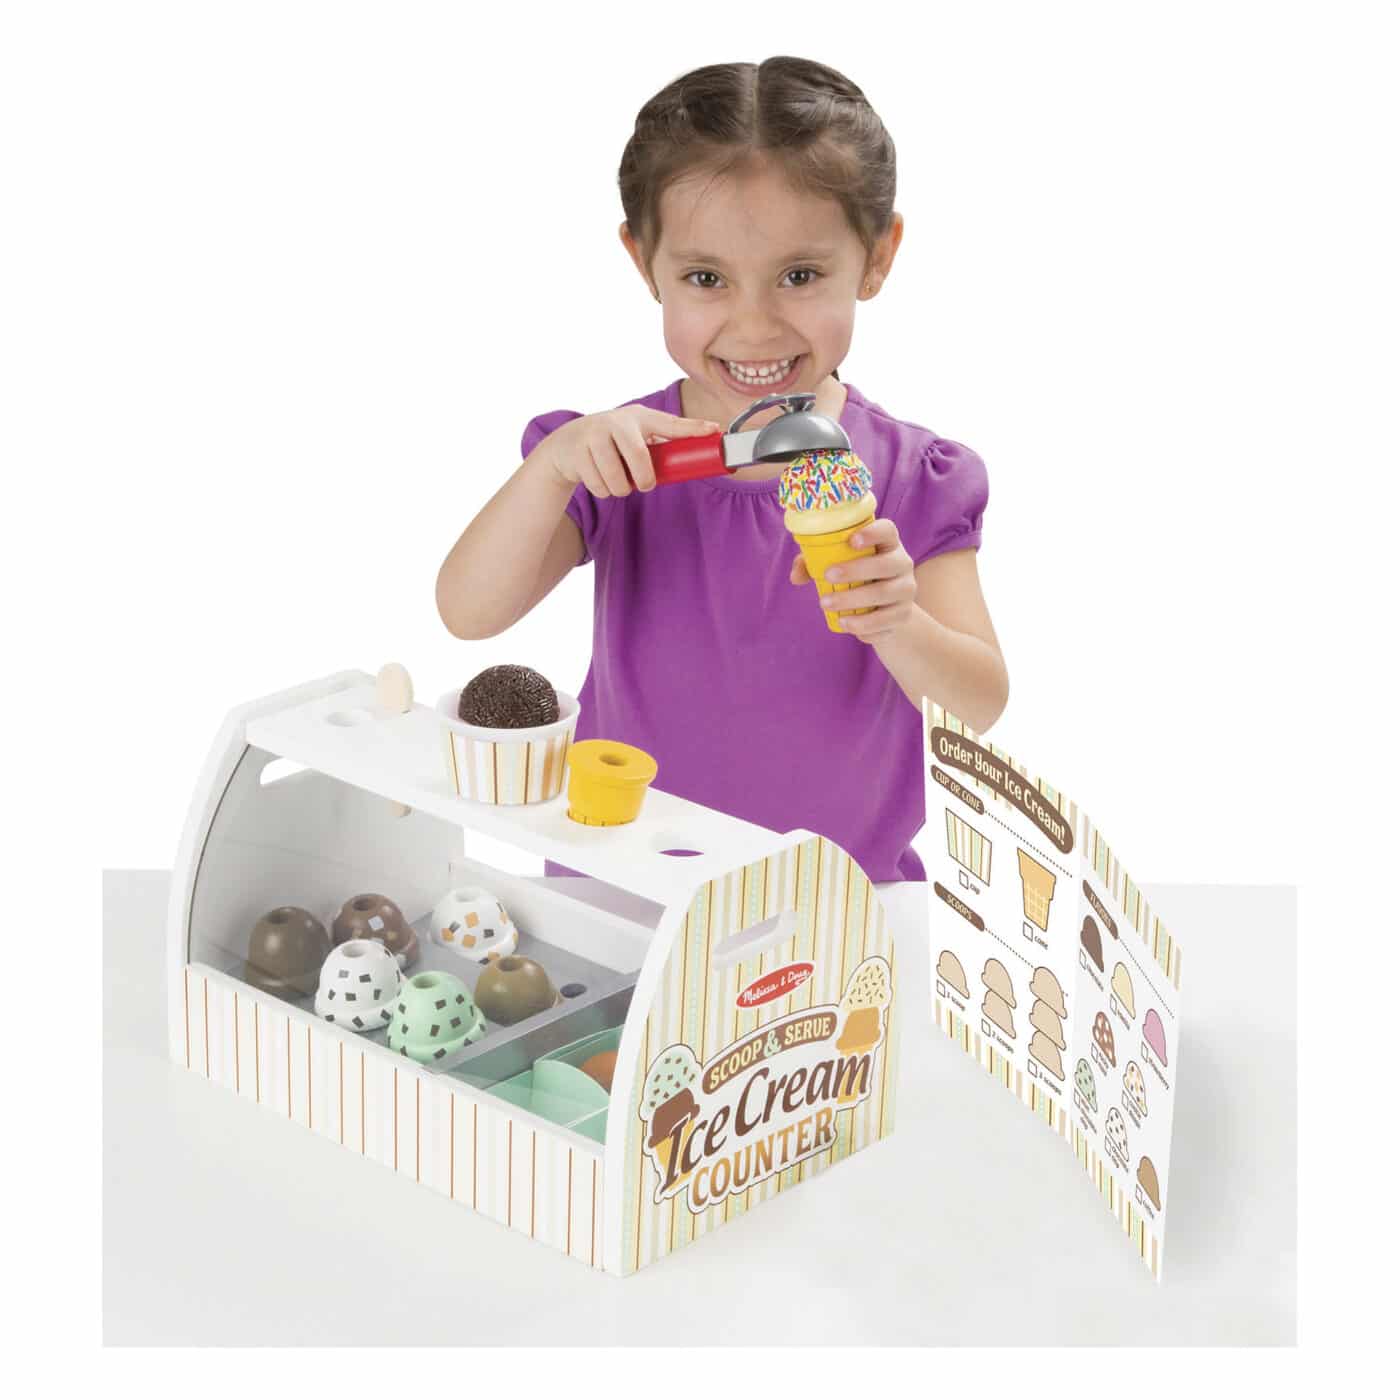 Melissa and Doug Wooden Scoop and Serve Ice Cream Counter